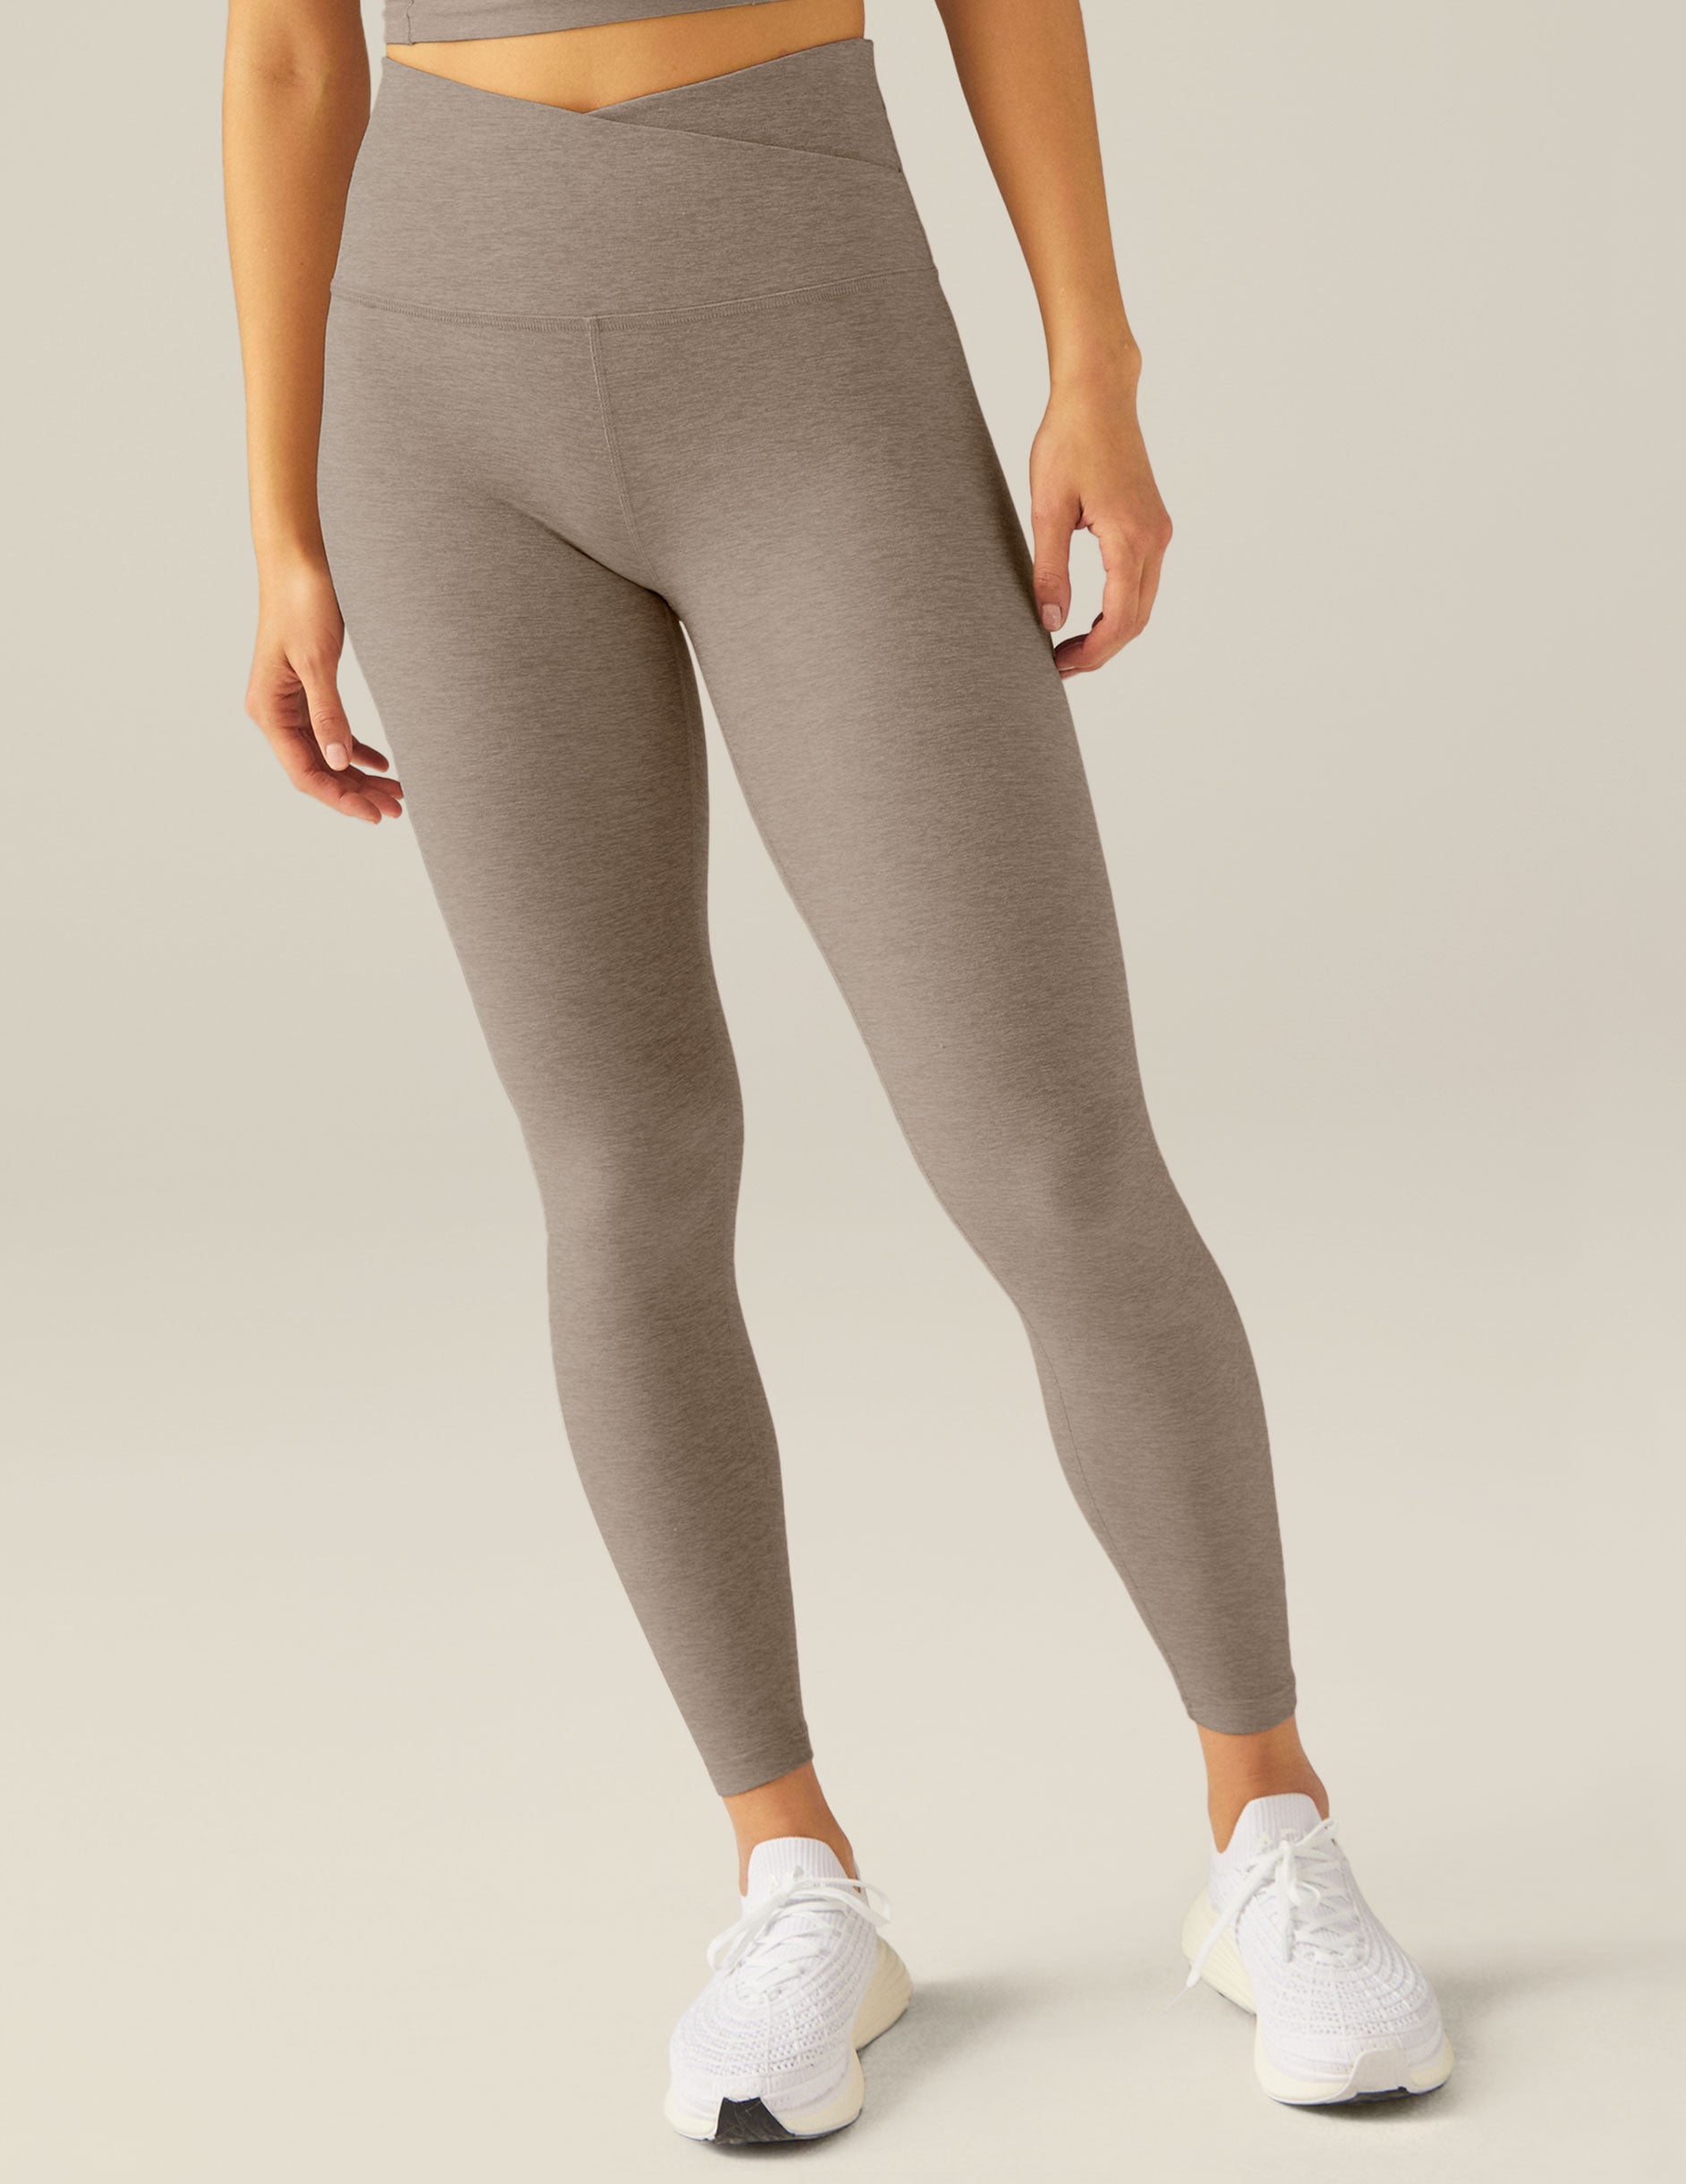 Beyond Yoga At Your Leisure High-Waisted Midi Leggings  Anthropologie  Mexico - Women's Clothing, Accessories & Home